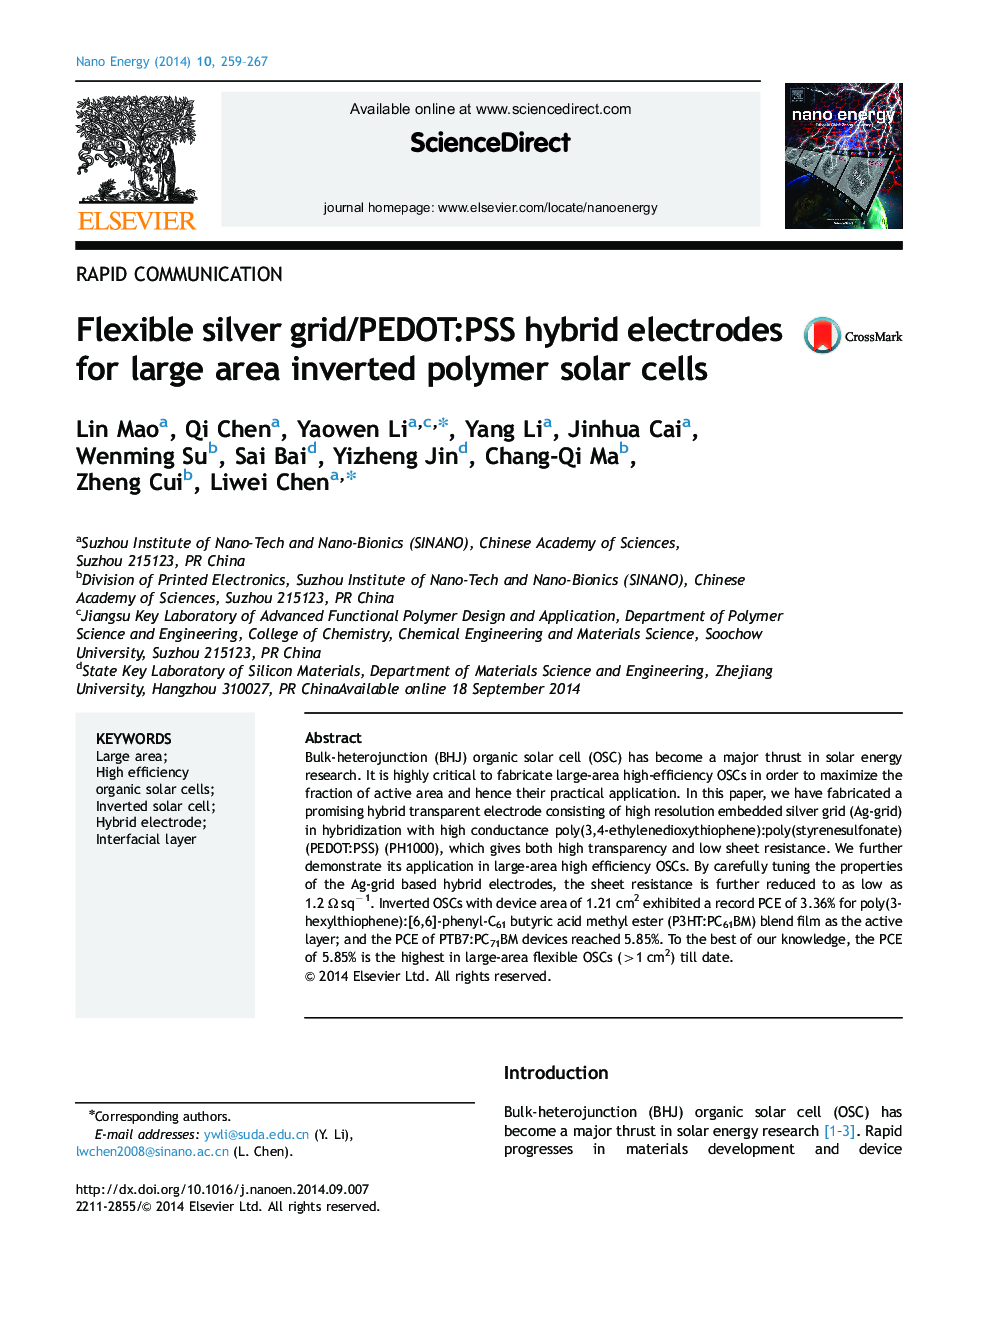 Flexible silver grid/PEDOT:PSS hybrid electrodes for large area inverted polymer solar cells